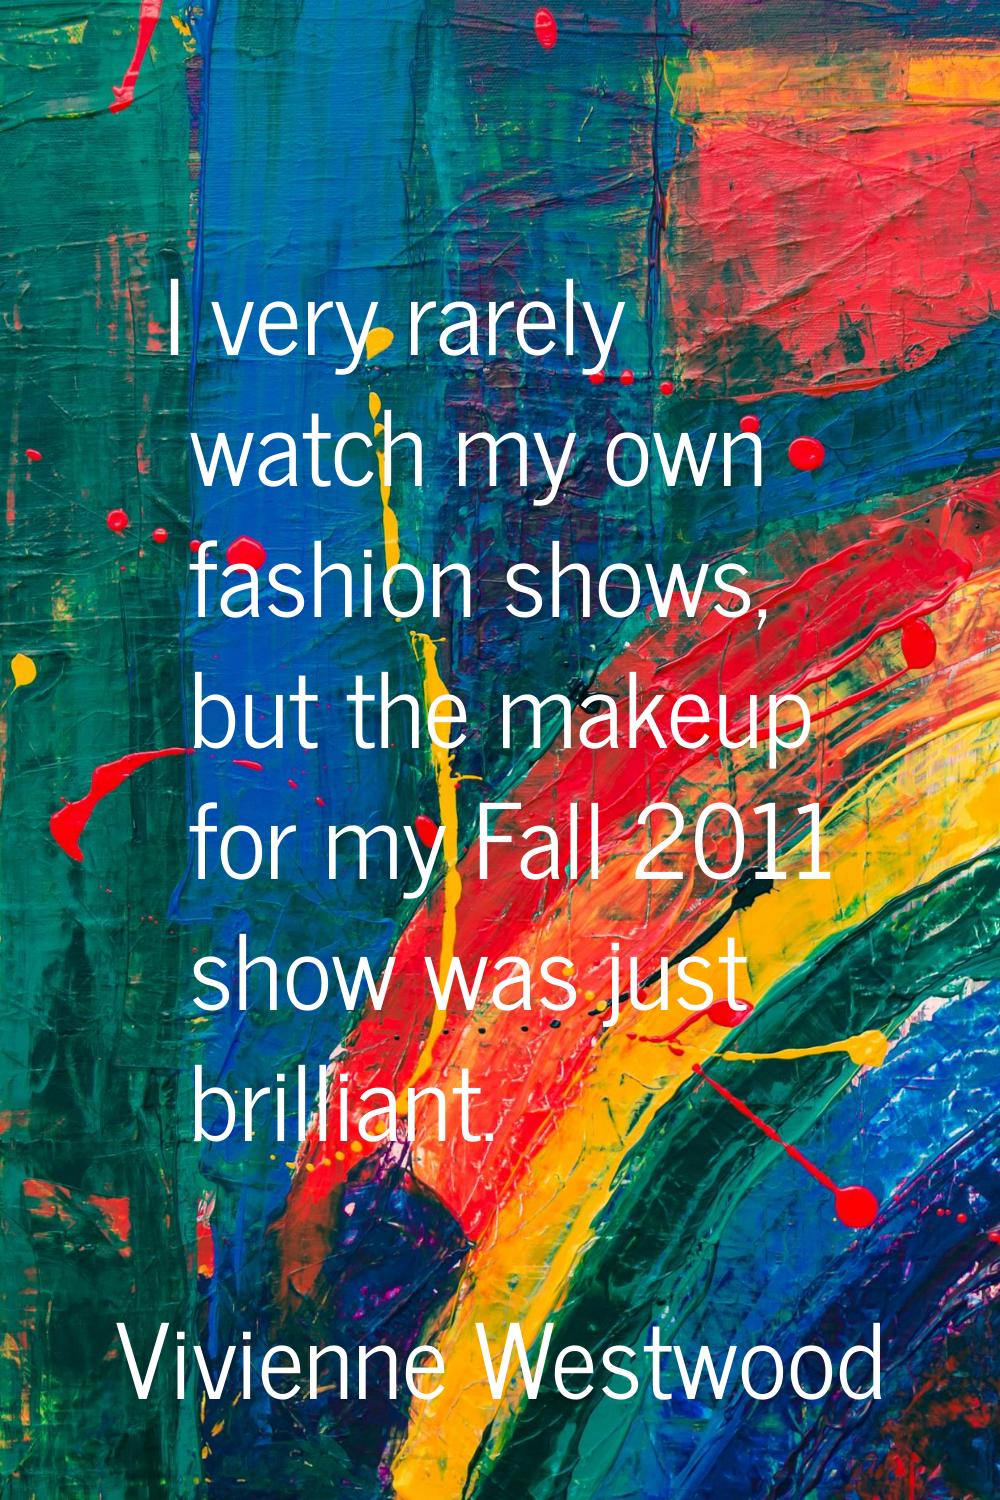 I very rarely watch my own fashion shows, but the makeup for my Fall 2011 show was just brilliant.